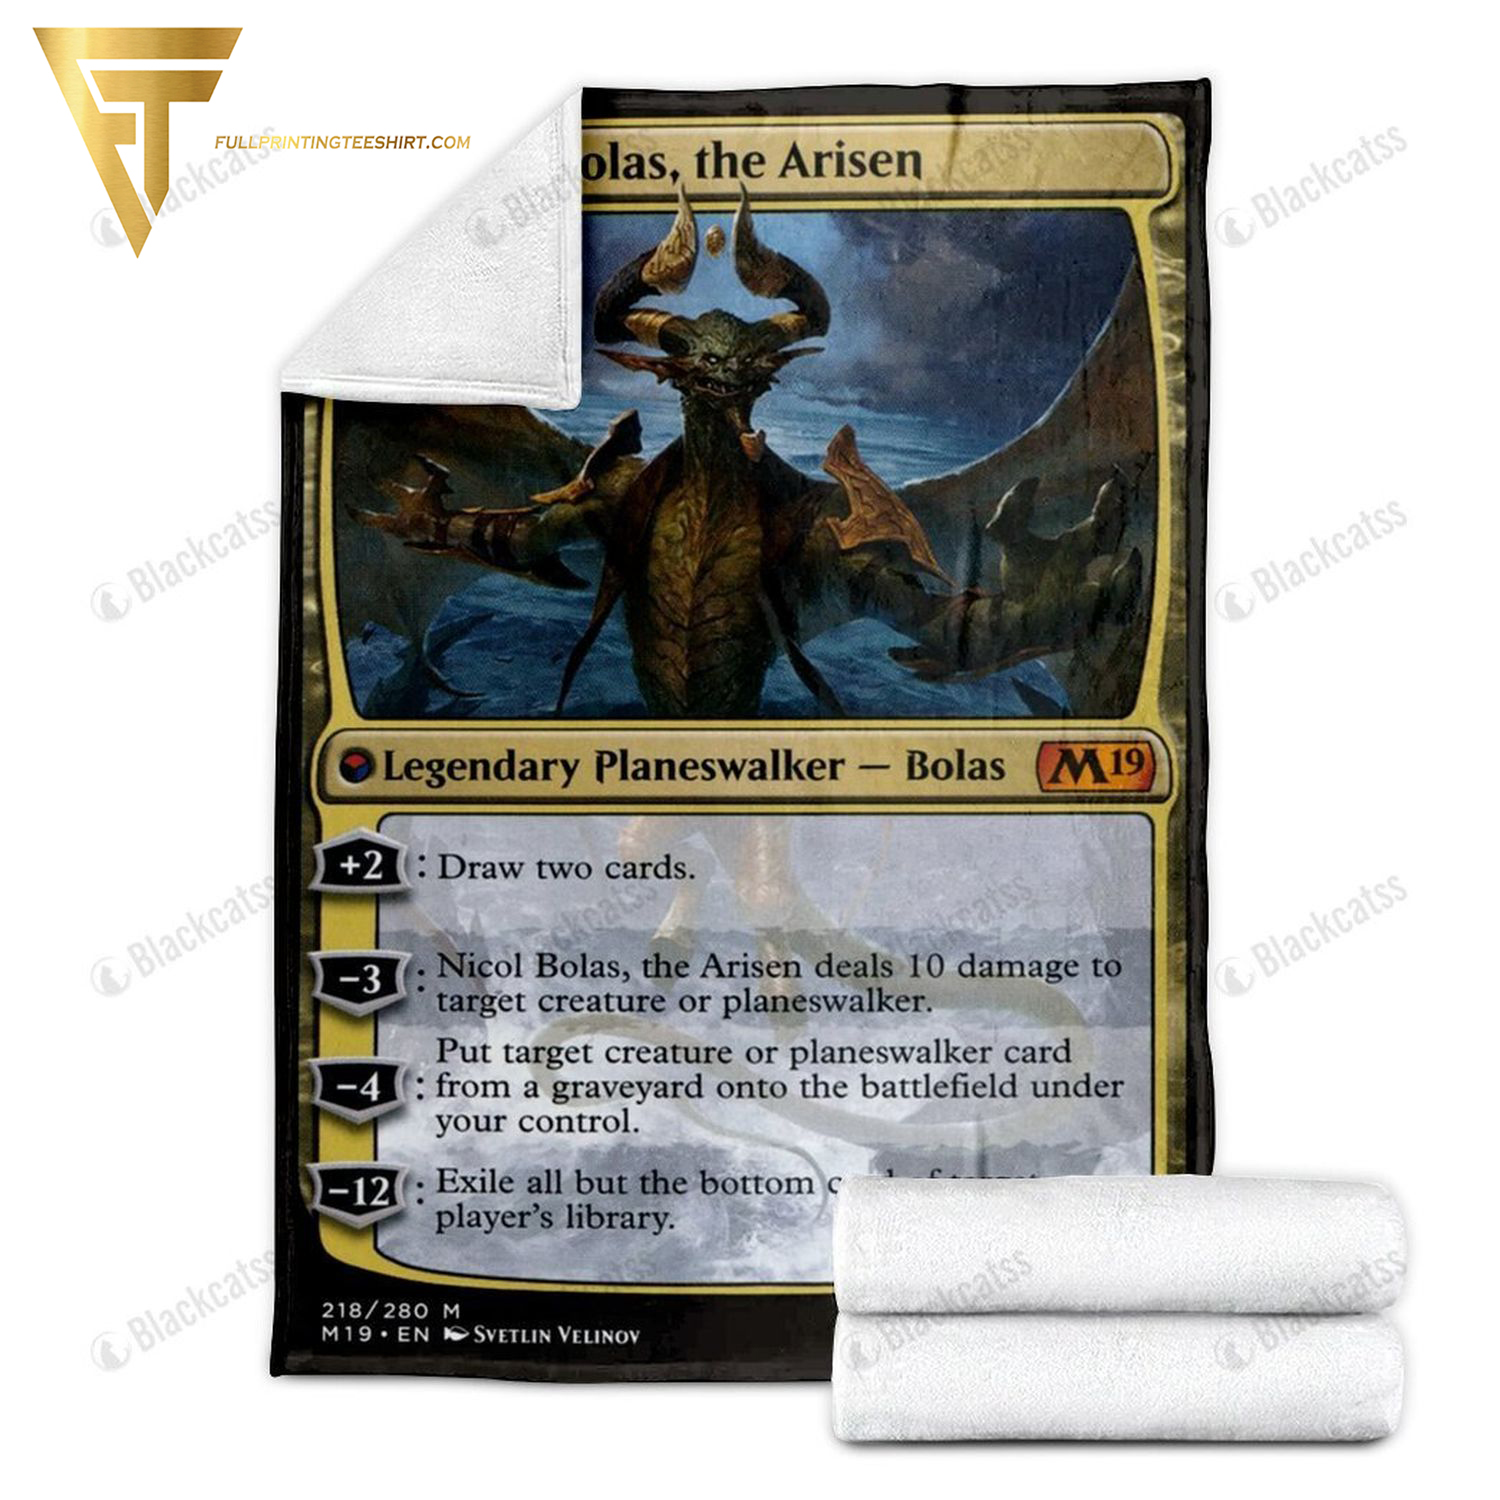 Game Magic The Gathering Nicol Bolas The Arisen All Over Print Blanket